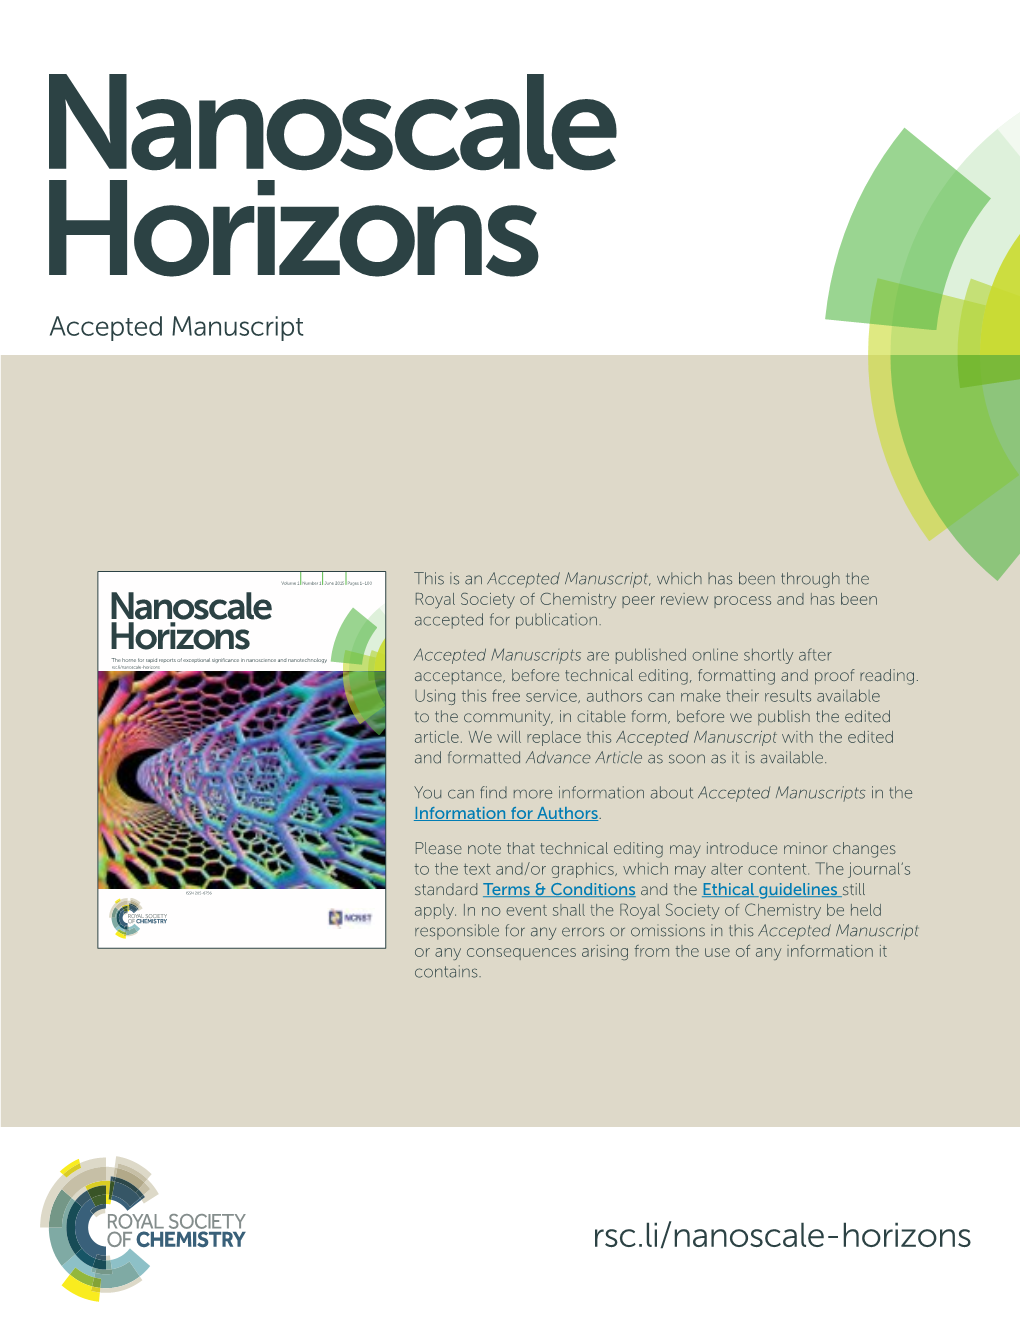 Nanoscale Horizons Theaccepted Home for Rapidmanuscript Reports of Exceptional Significance in Nanoscience and Nanotechnology